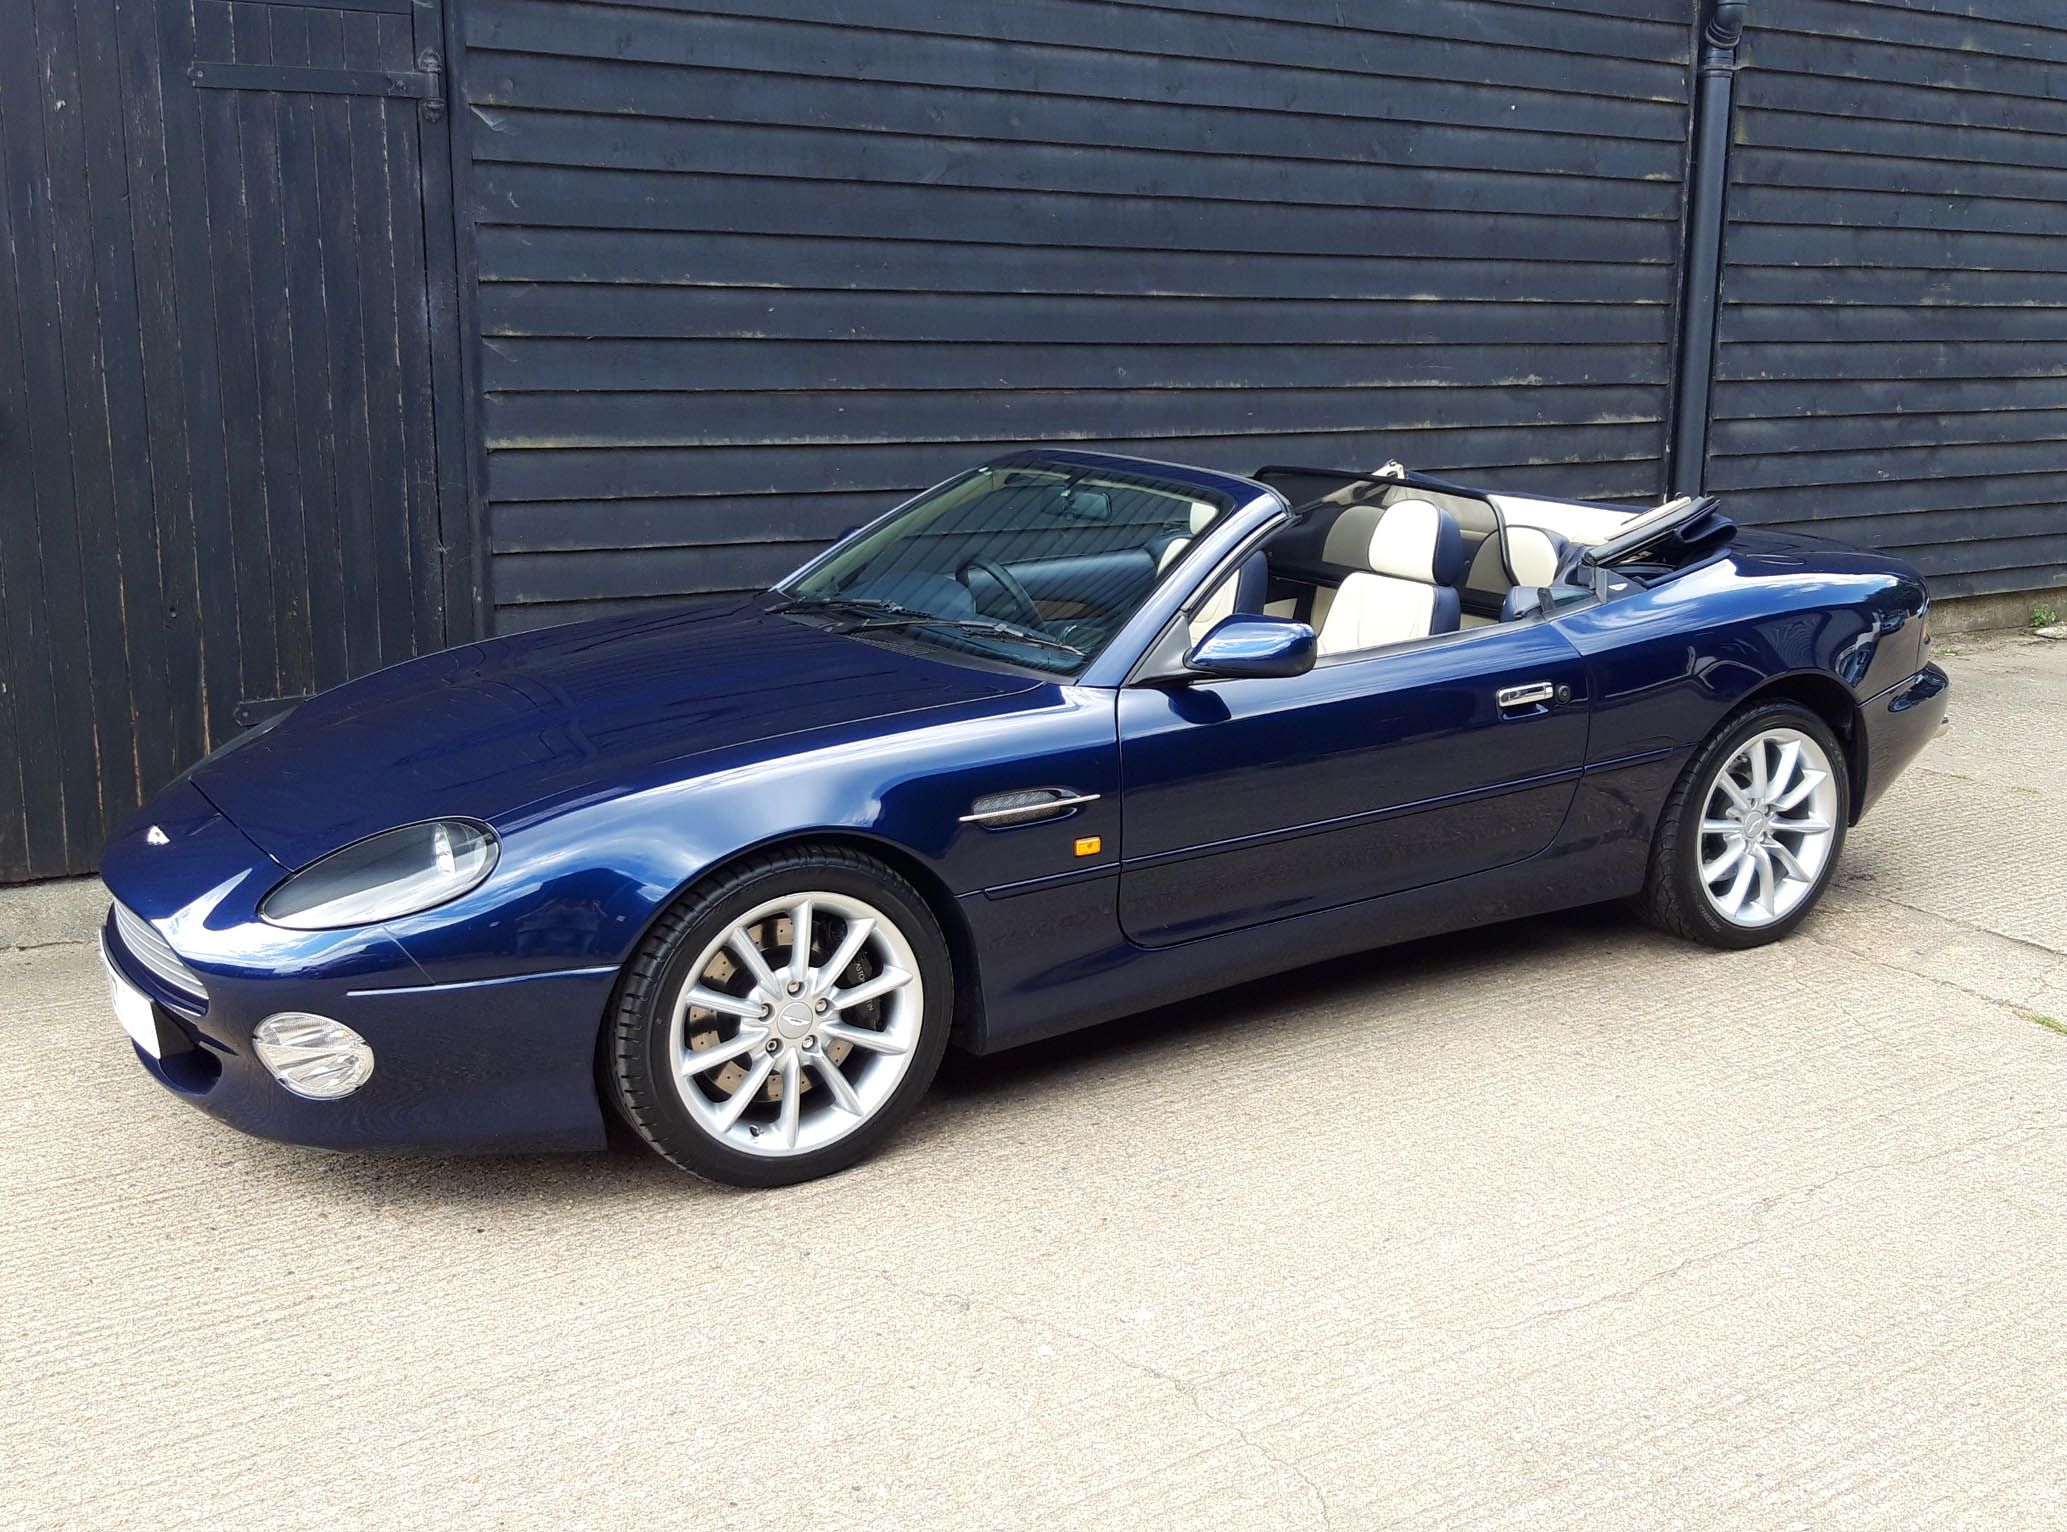 Prices are coming down on the 2001 Aston Martin DB7 Convertible